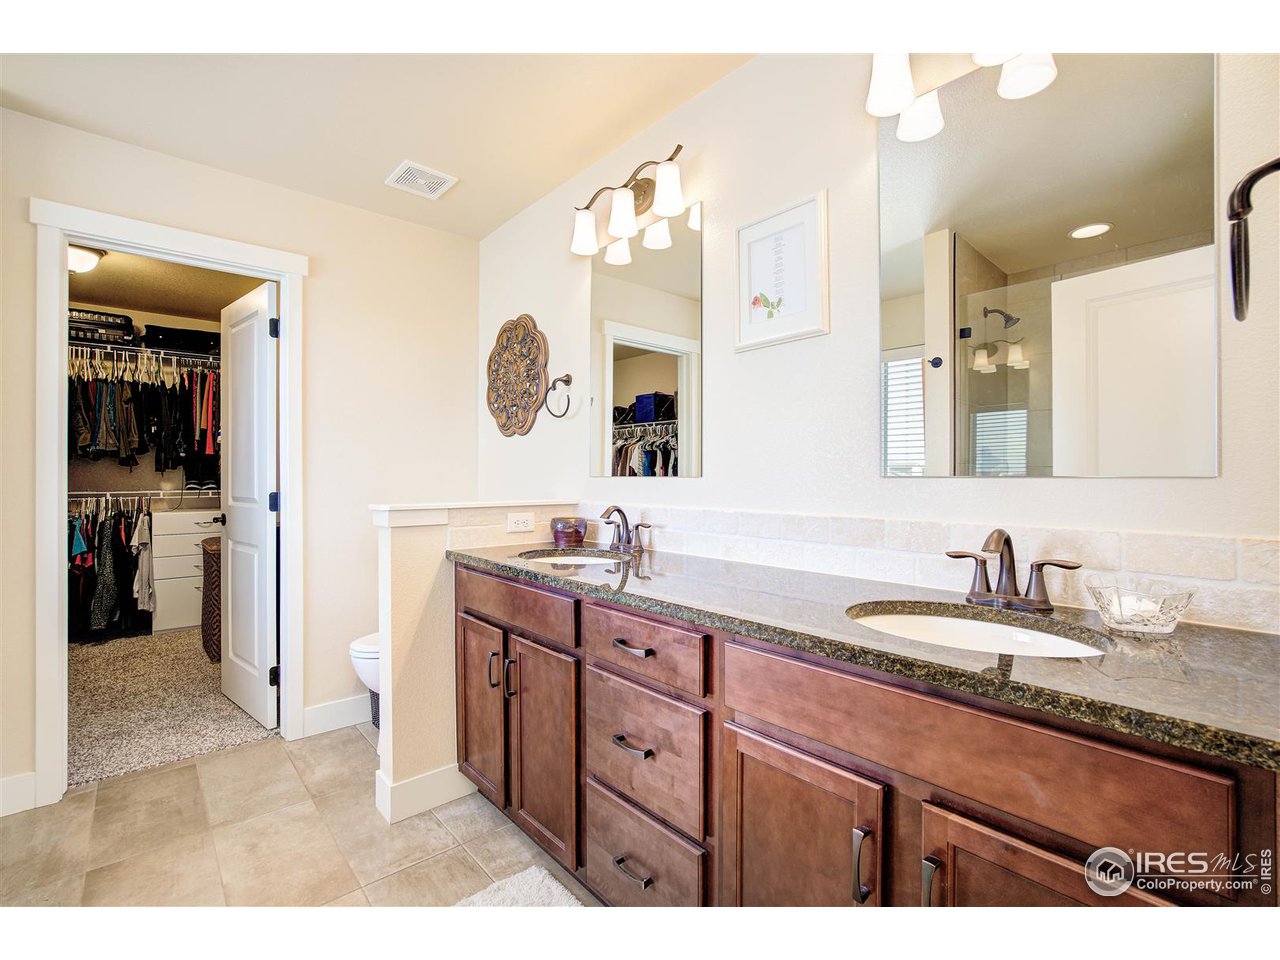 Comfort height stone counters, dual vanities, tile floors, and large walk-in closet